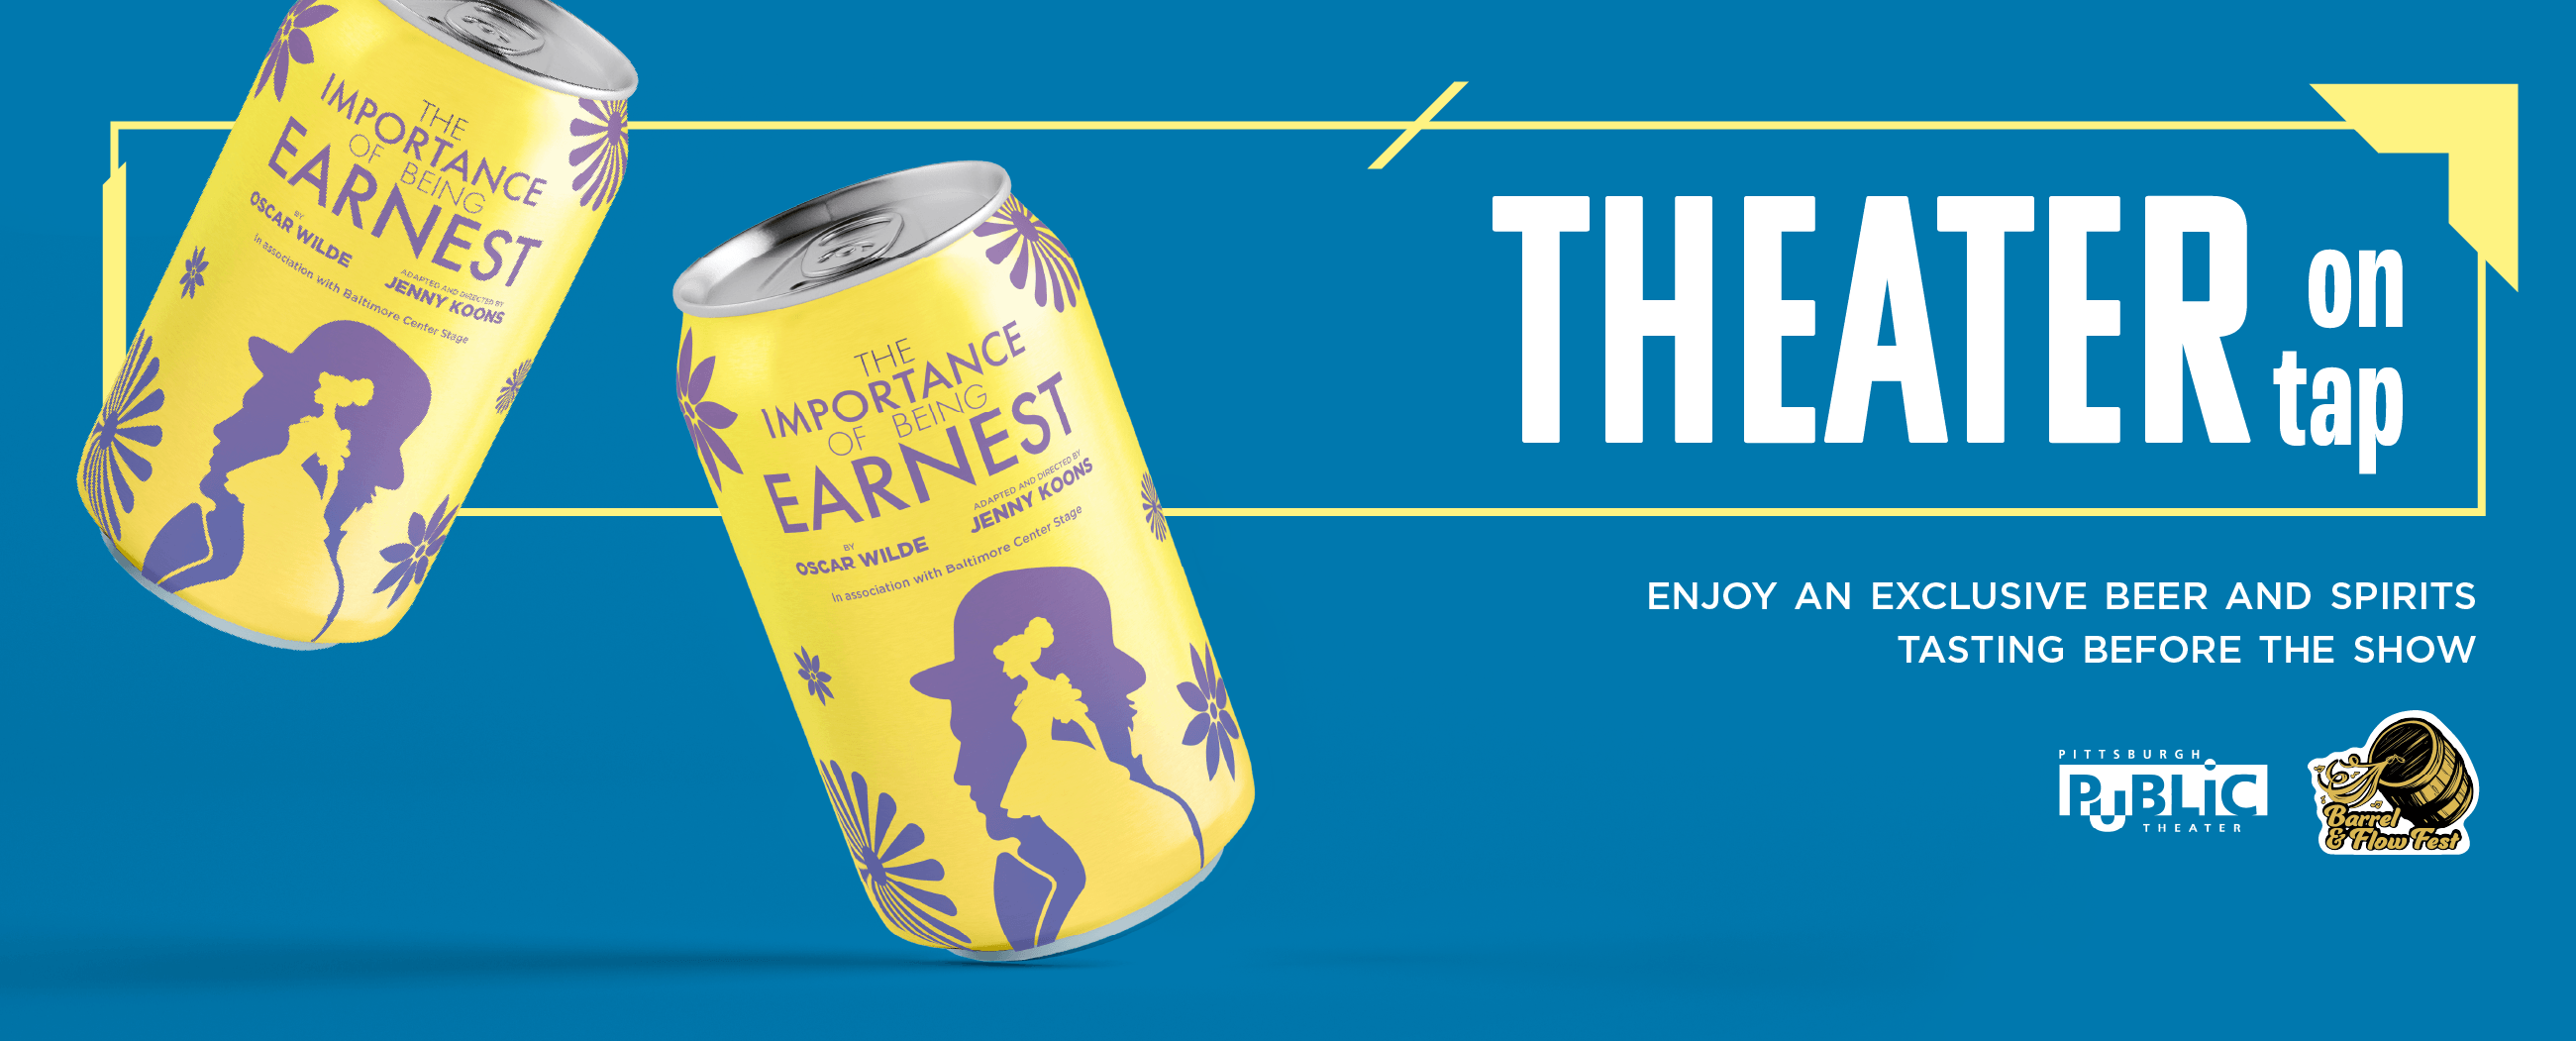 Theater on Tap - The Importance of Being Earnest